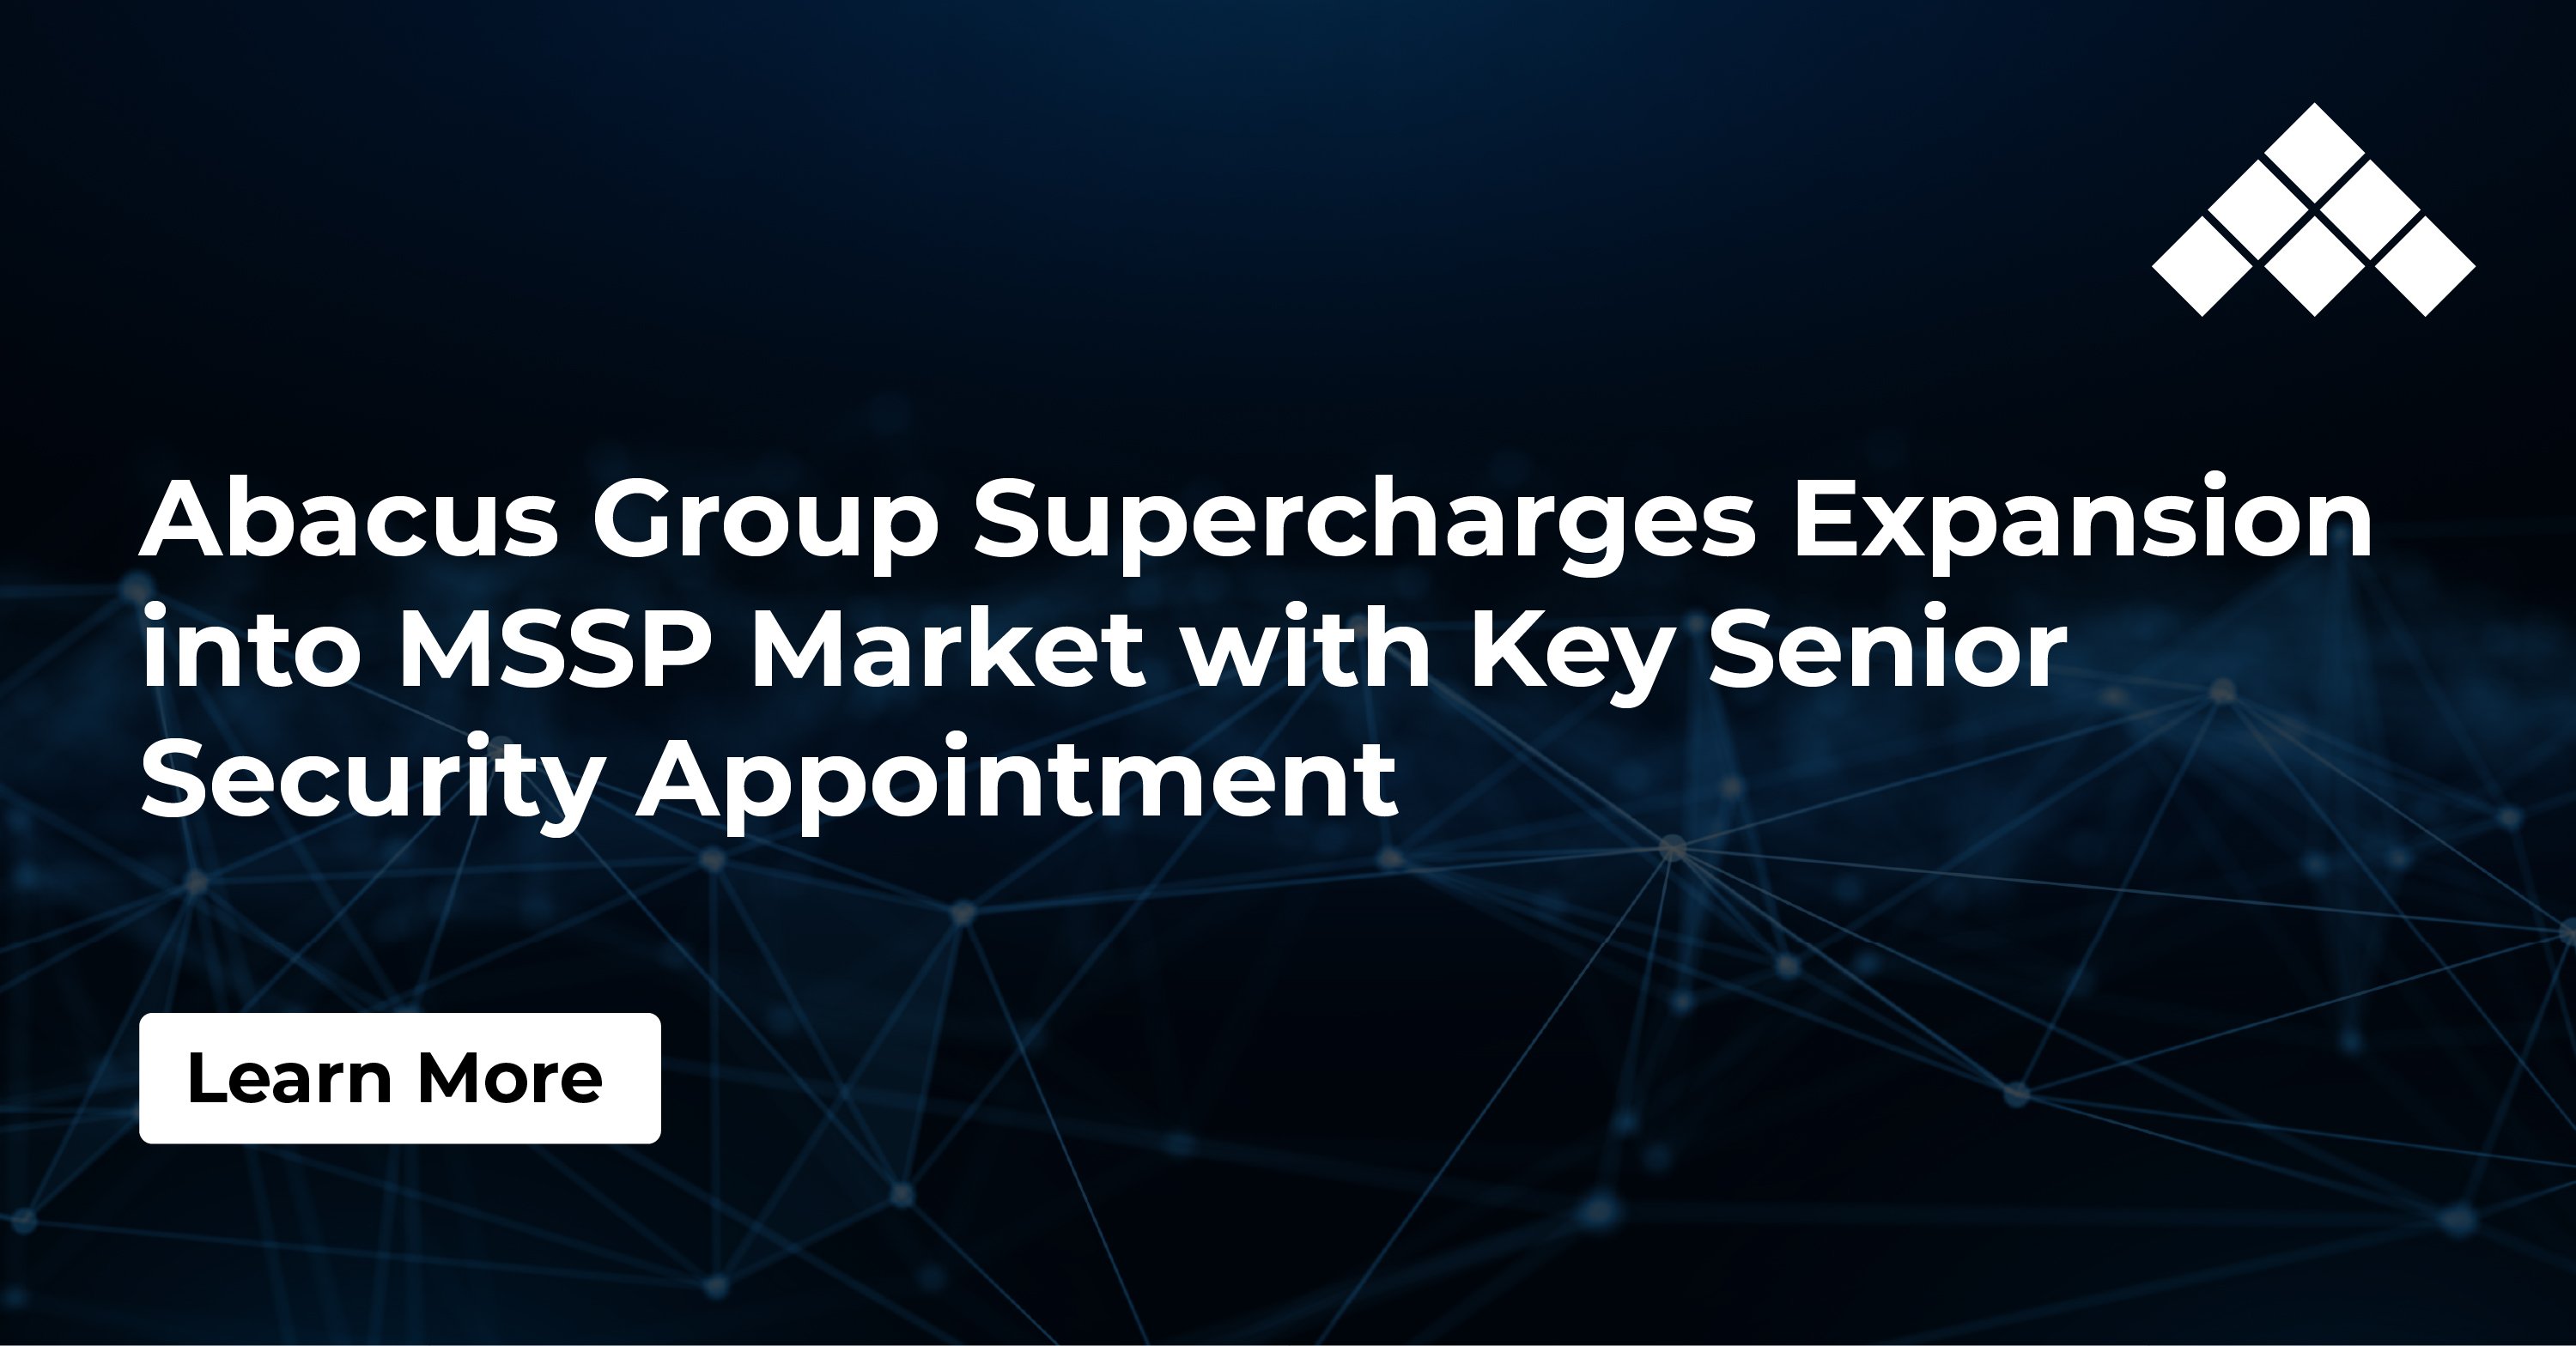 Abacus Group Supercharges Expansion into MSSP Market with Key Senior Security Appointment